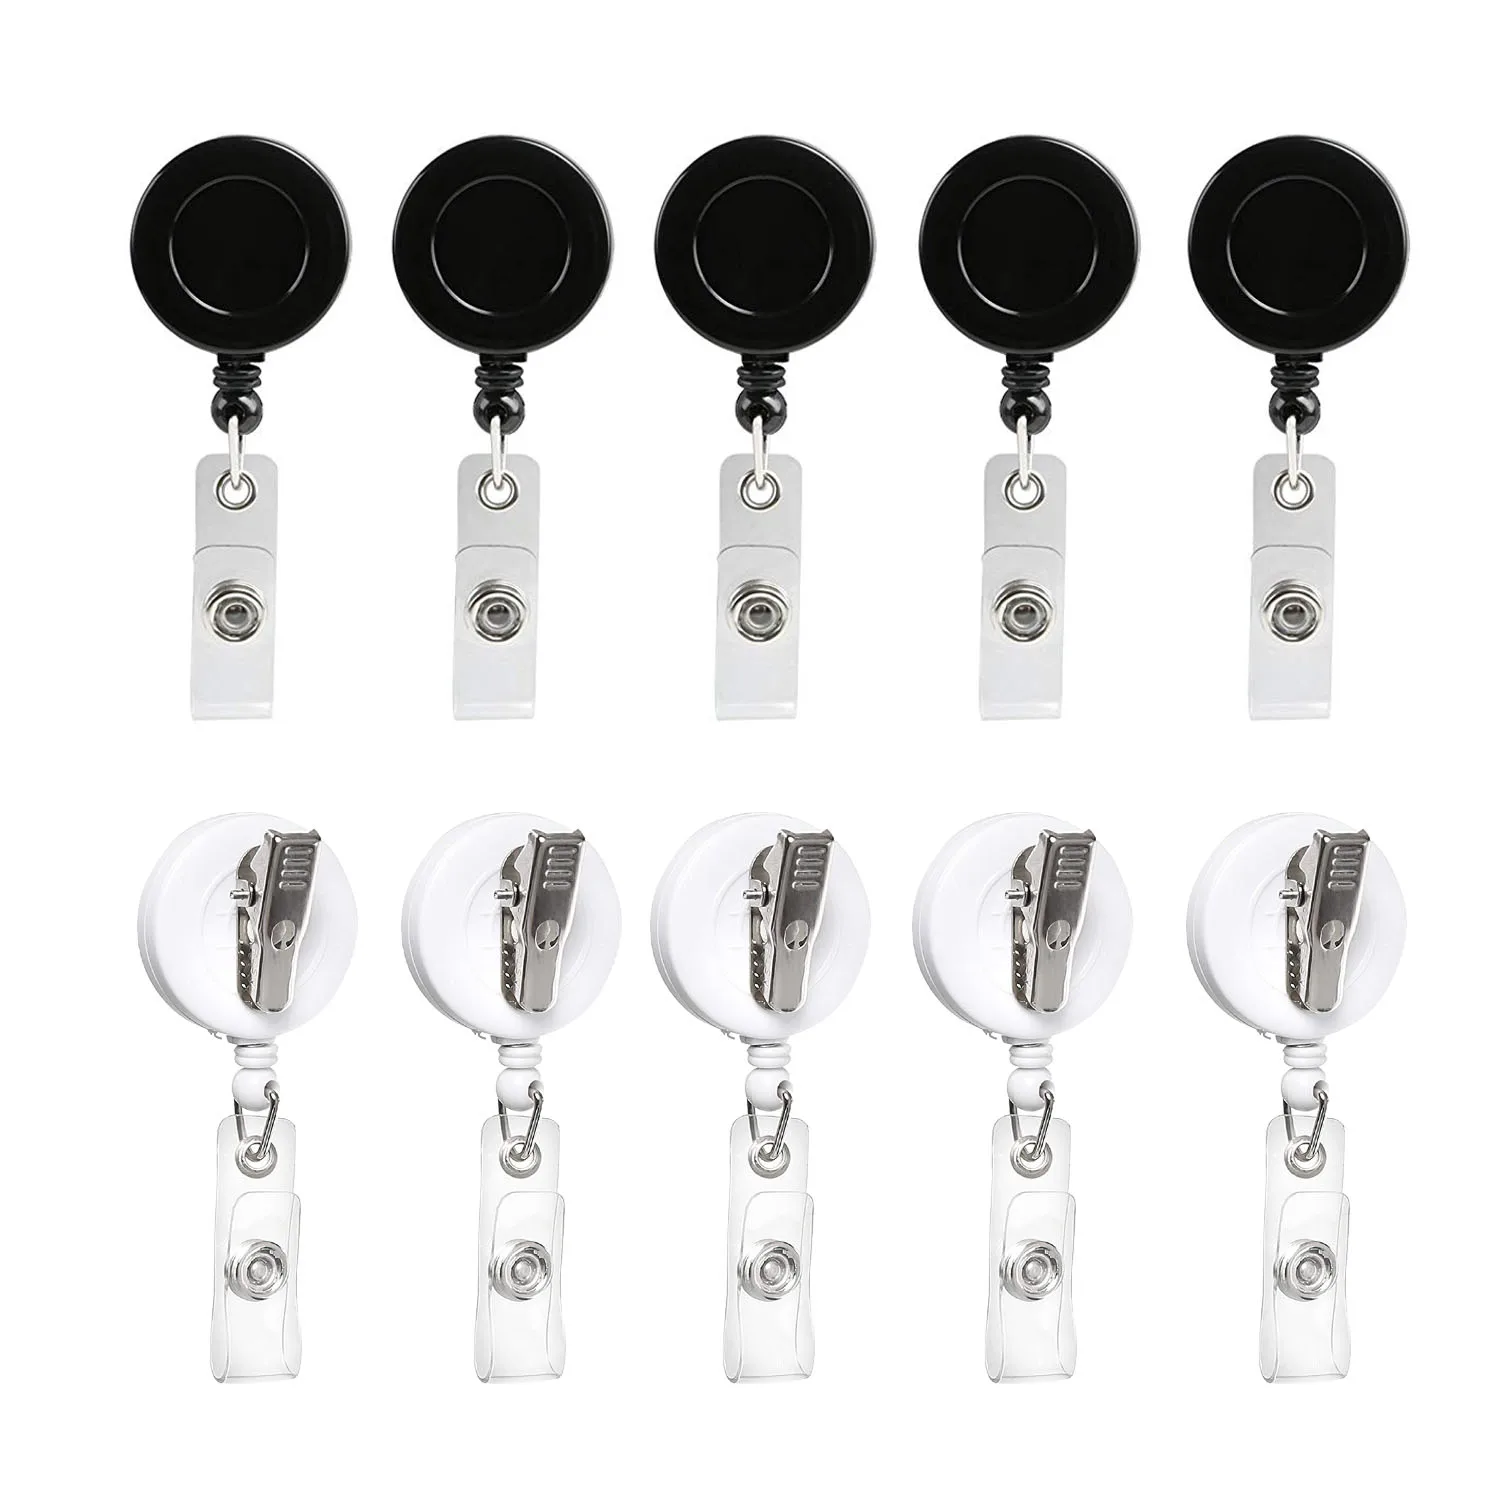 10 Pieces Retractable Badge Holder ID Badge Reel Clip On Card Holders with Alligator Clip 5 black 5 white